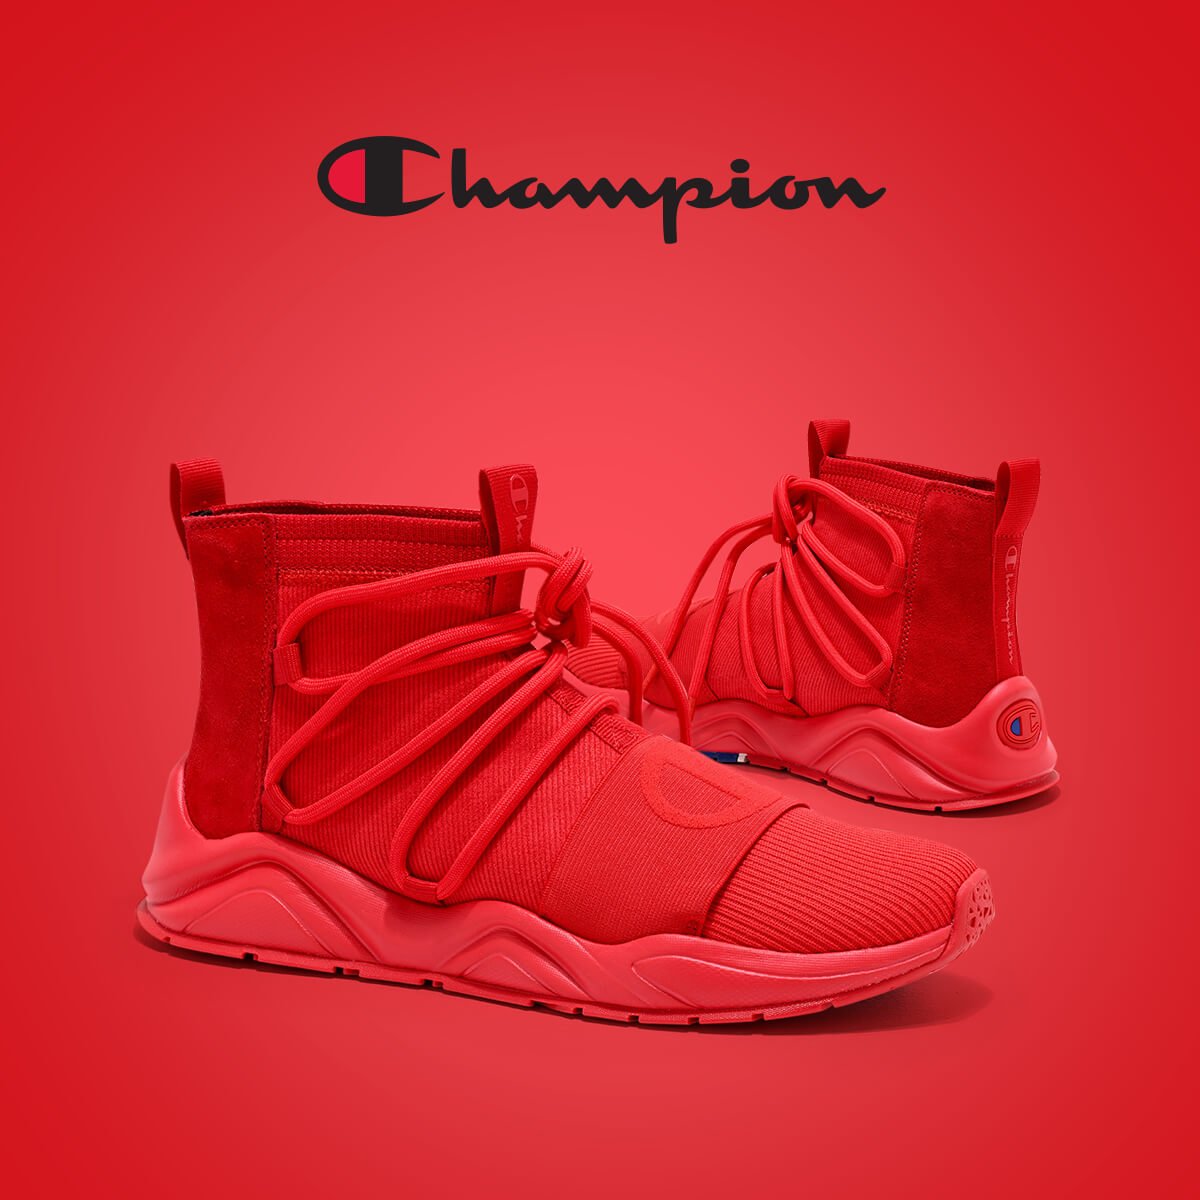 red high top champion shoes